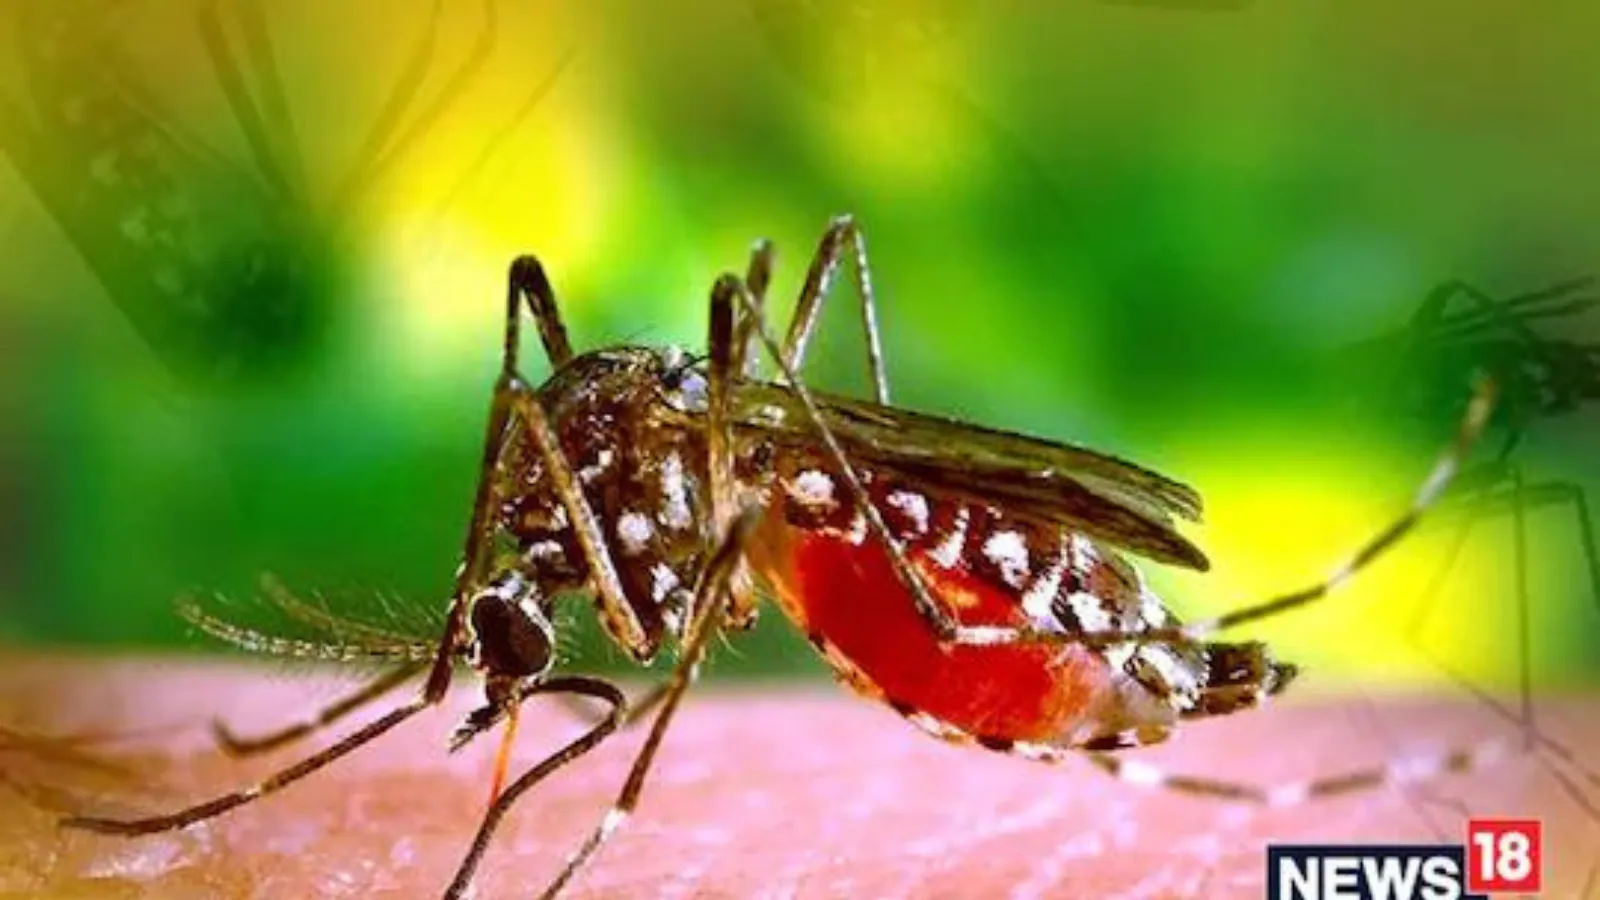 Mosquito Attack Can Lead To These 5 Monsoon Diseases. Take A Look